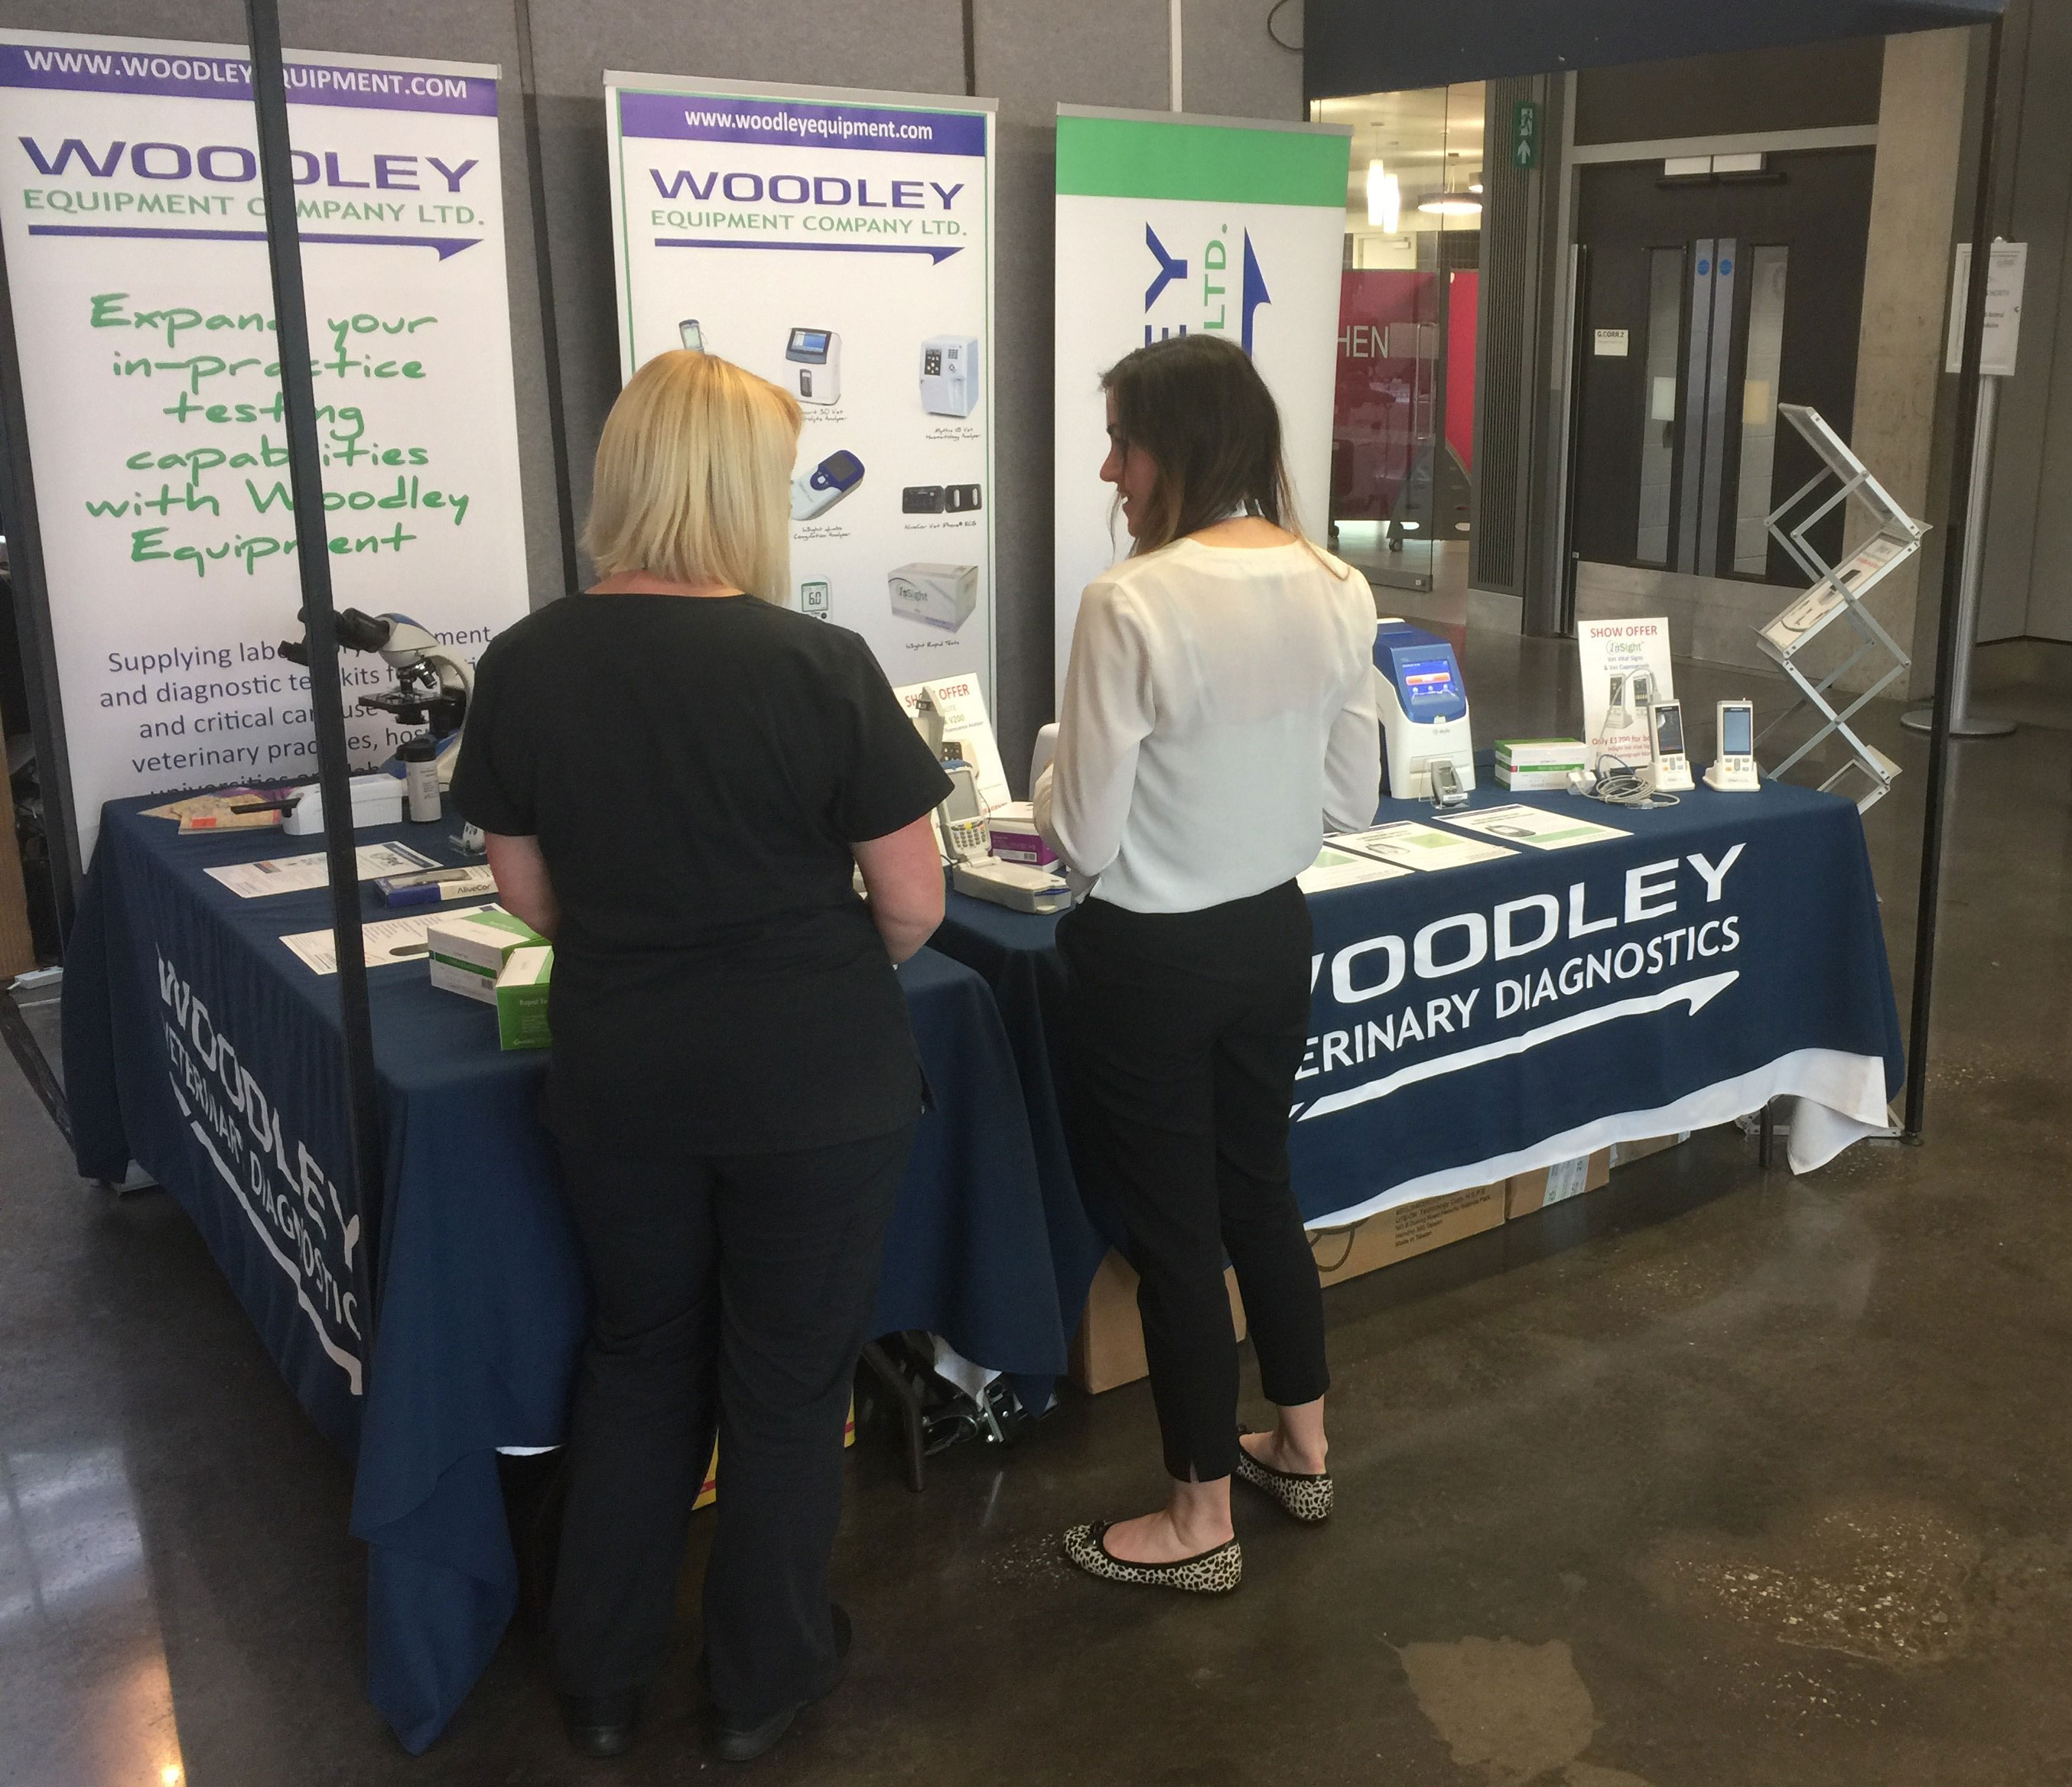 Woodley Equipment is Exhibiting at Vets North 2019